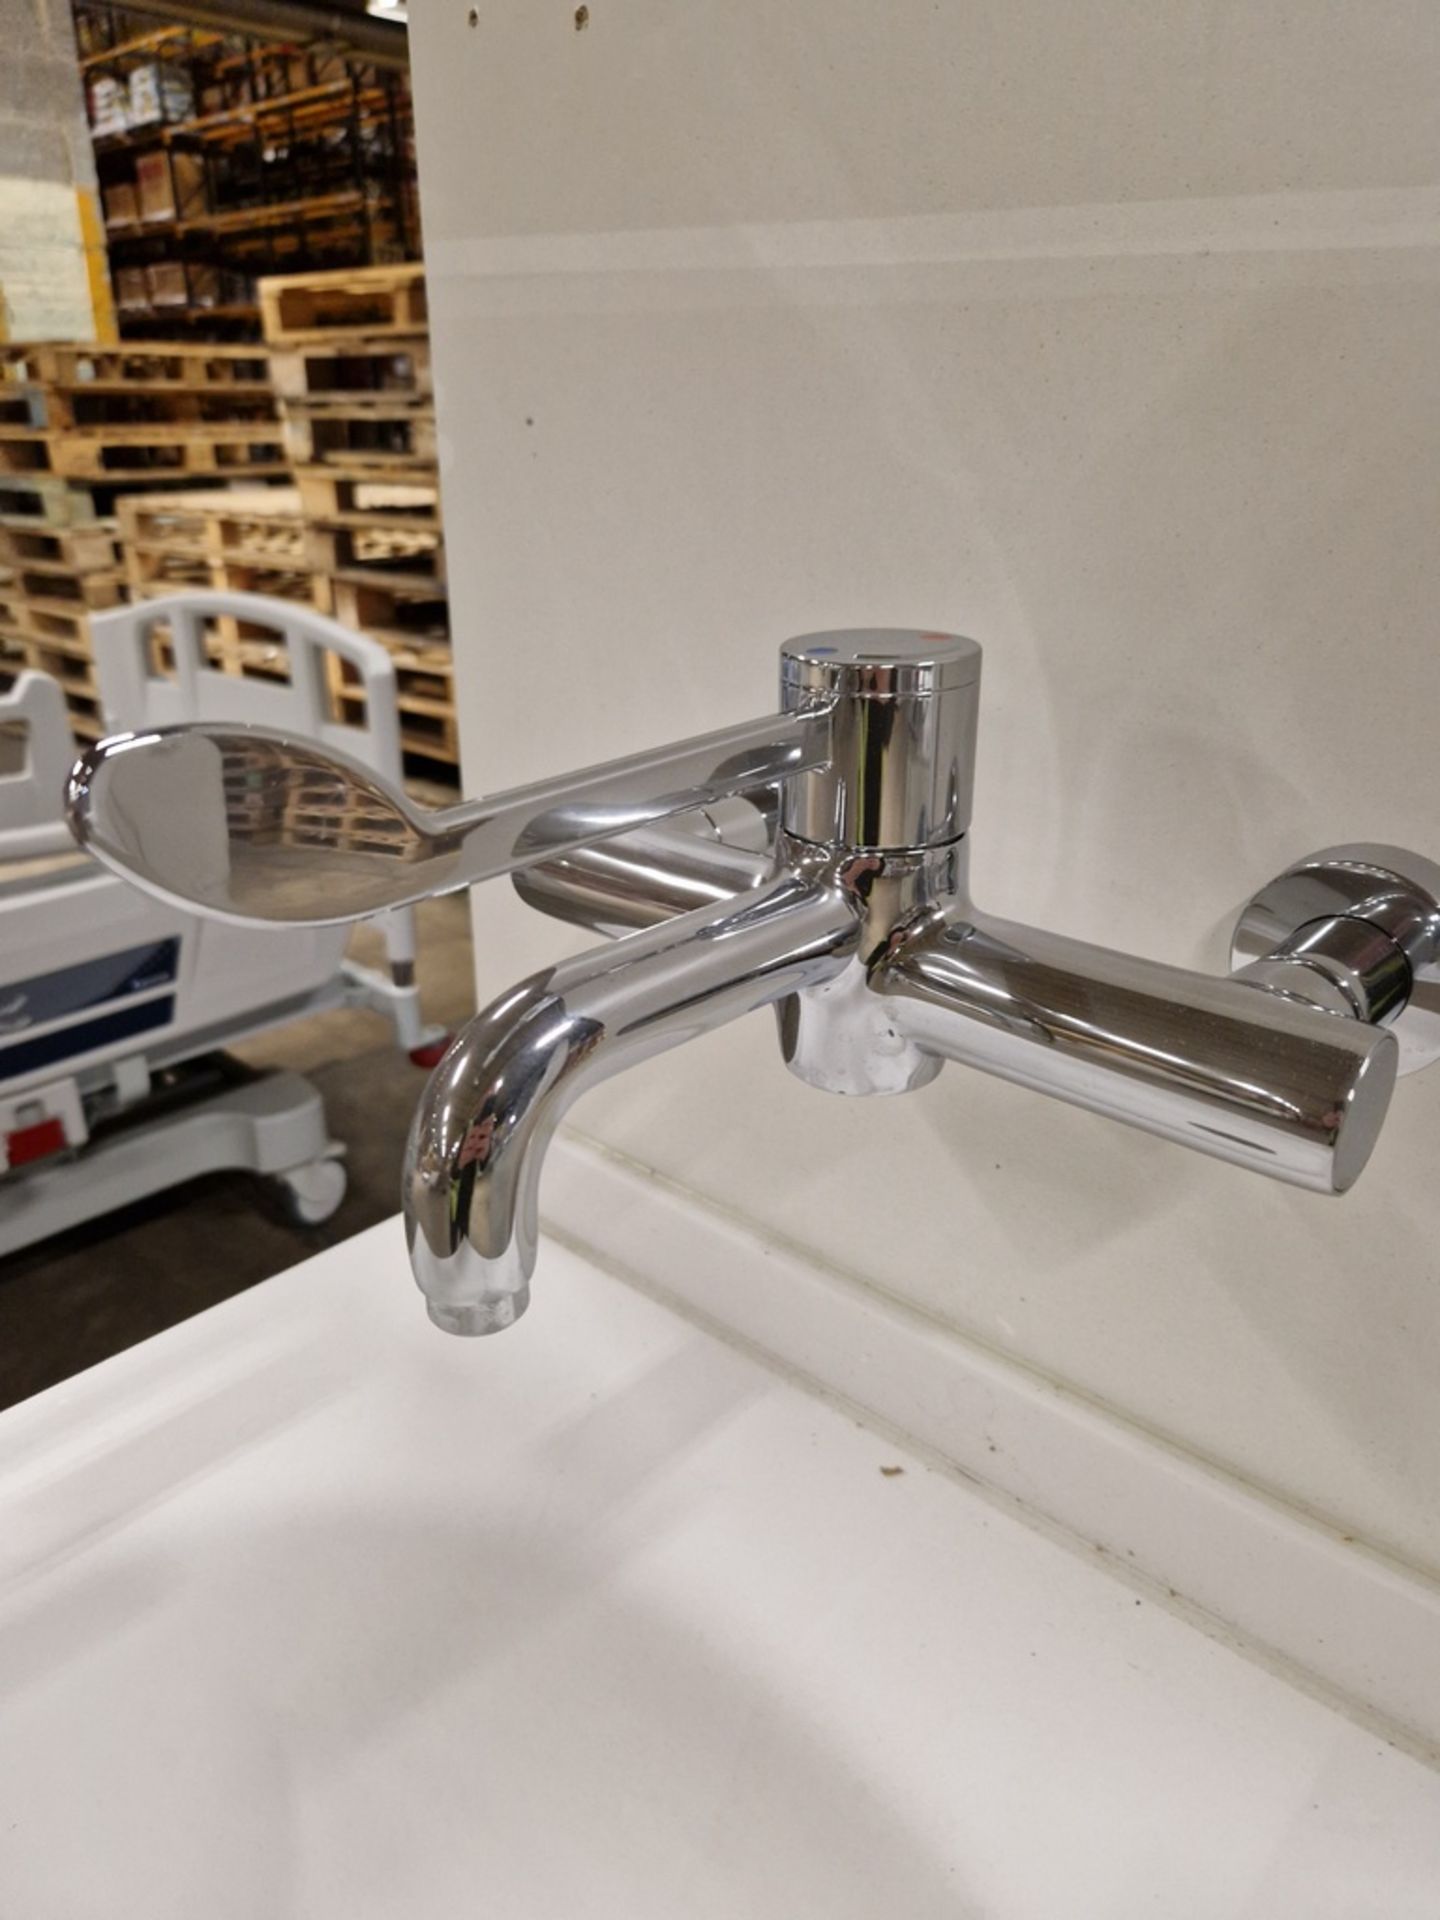 48x portable hand wash station with under counter storage - with Armitage Shanks mixer tap - Image 3 of 6